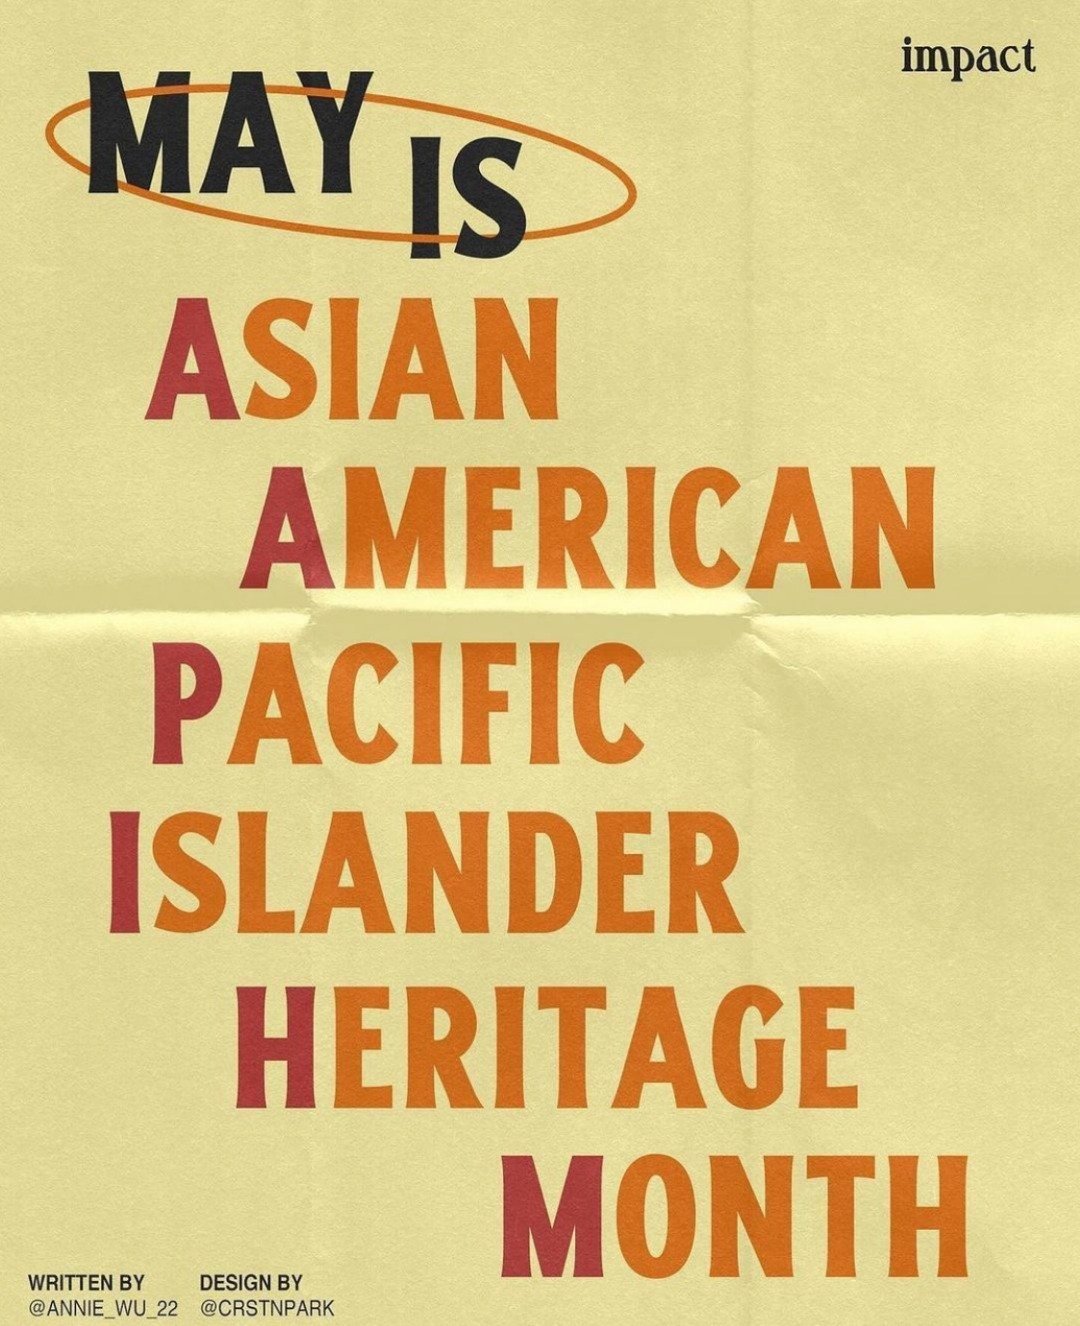 May is Asian American &amp; Pacific Islander Heritage Month. 🧡 Enjoy this beautifully crafted repost by @annie_wu_22 and @crstnpark that shares history, resources, and actions that you can take to show your support, respect, and appreciation for AAP